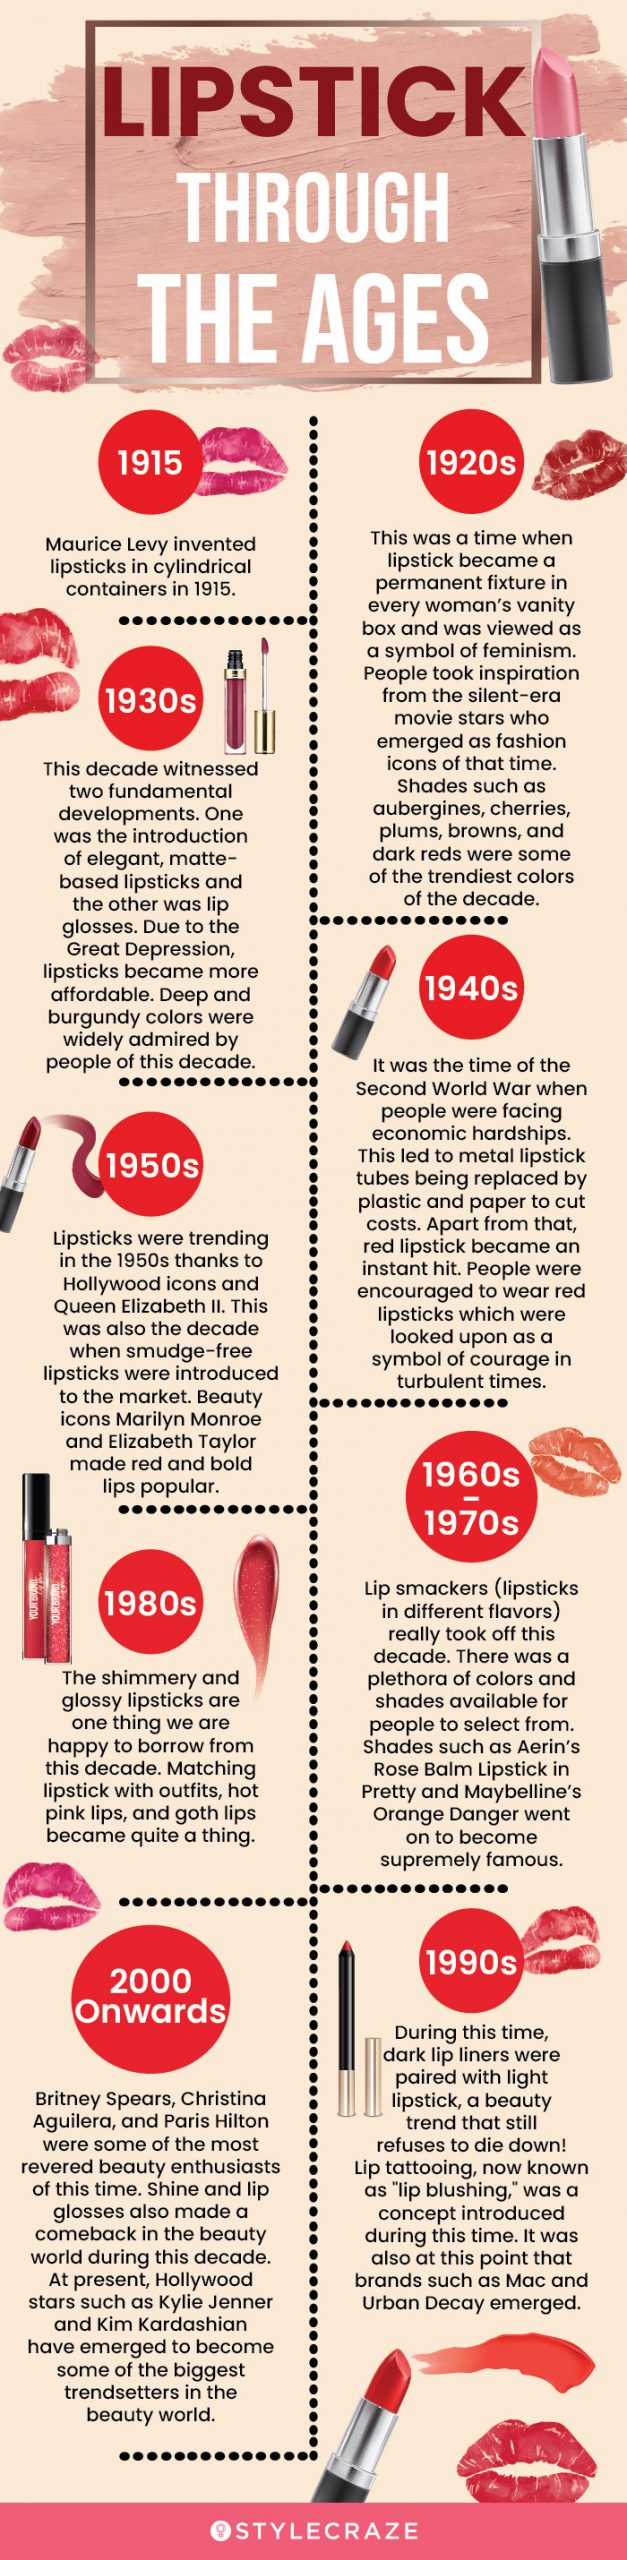 lipstick through the ages (infographic)